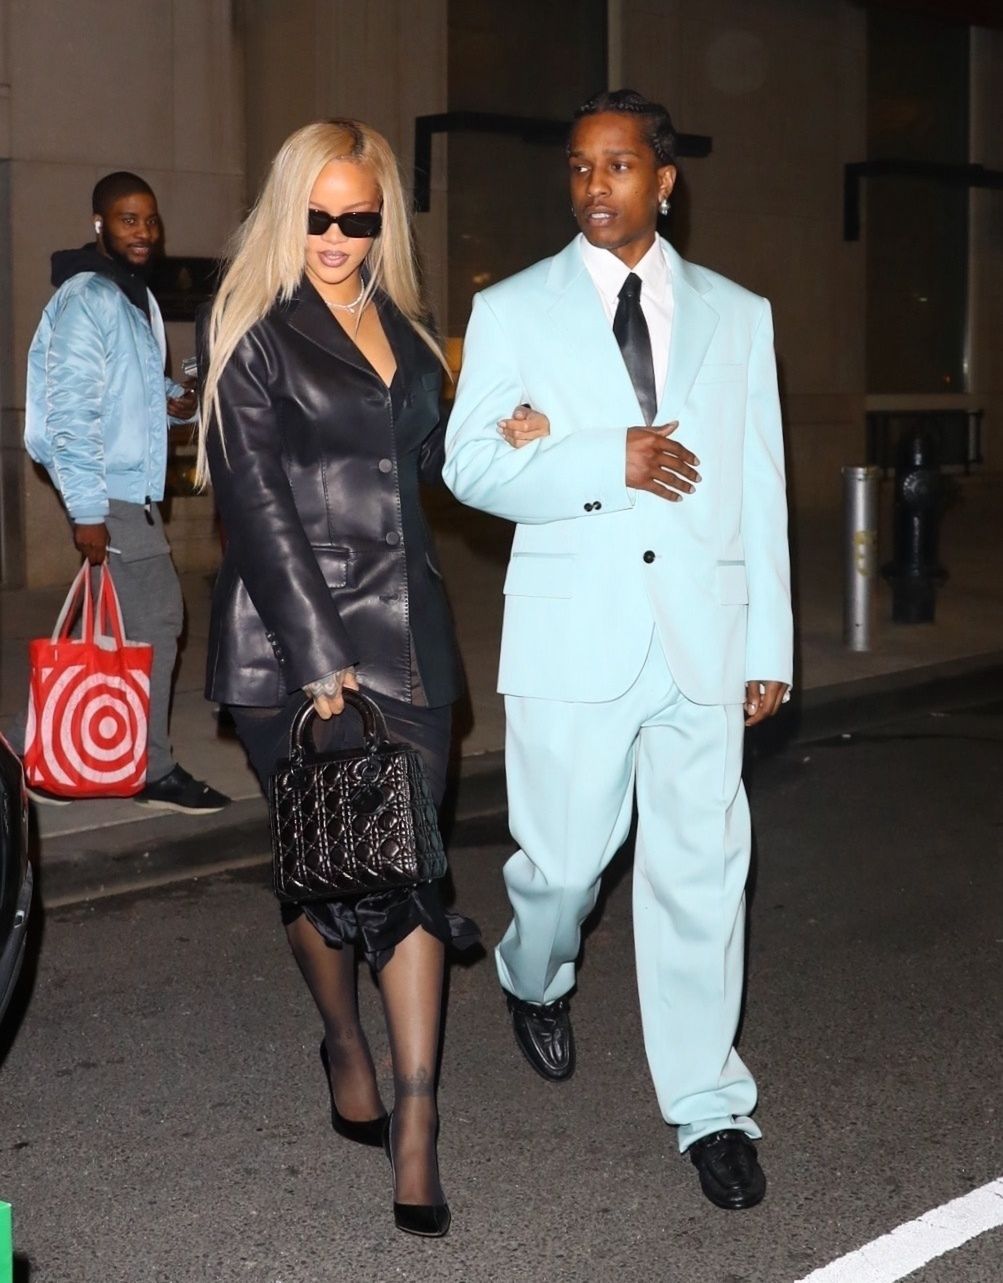 Rihanna and A$AP Rocky on their way to a party